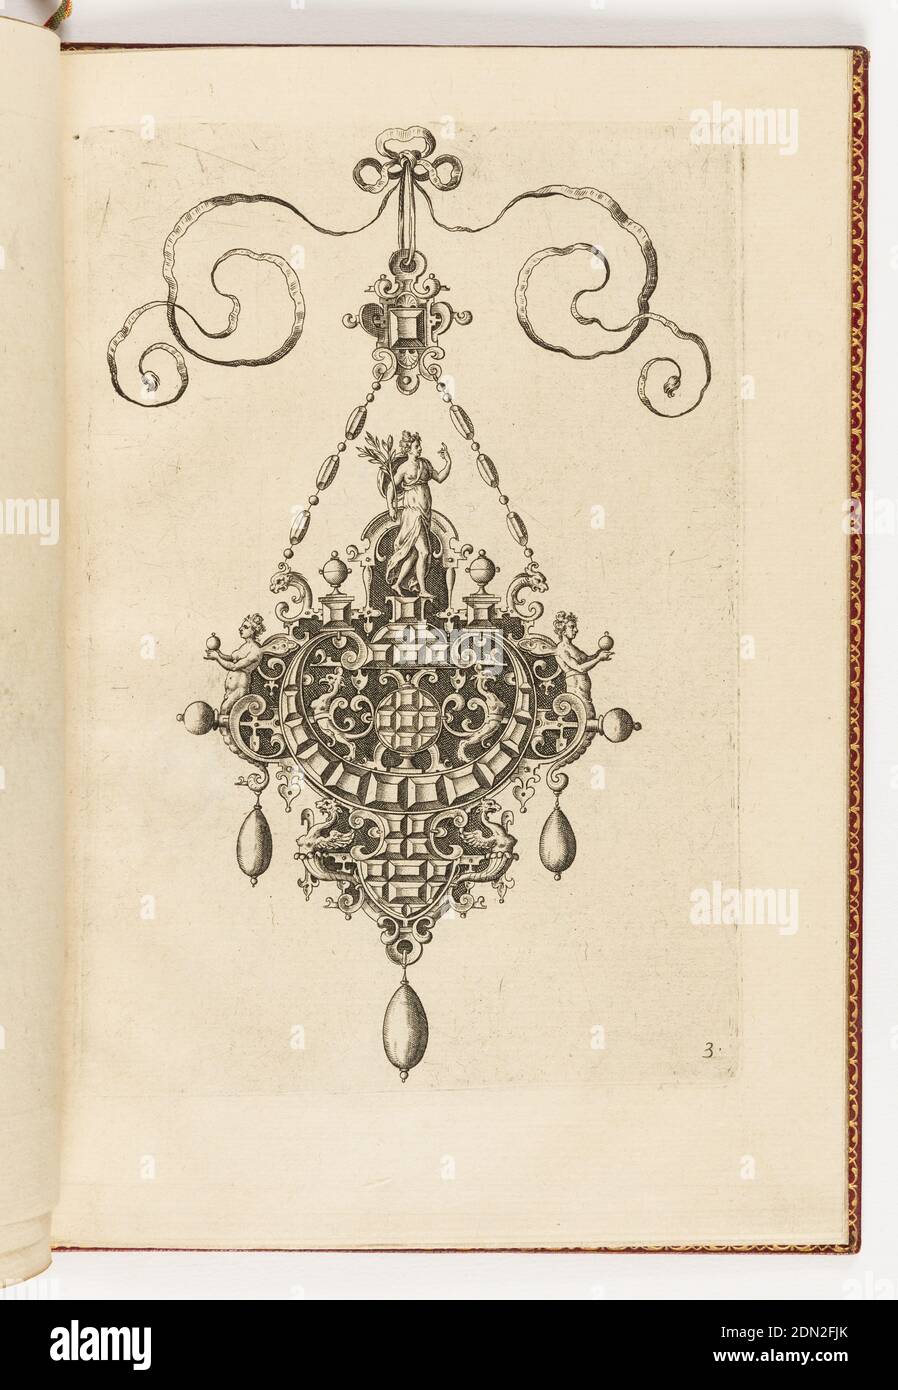 Plate 3, from Monilium Bullarum Inauriumque Artificiocissimae Icones, Ioannis Collaert Opus Postremum (Designs for Necklaces, Pendants and Earrings of the Highest Skill, the Final Work by Joannis Collaert), Hans Collaert the Elder, Flemish, ca. 1530 - 1581, Philips Galle, Flemish, 1537 - 1612, Engraving on paper, laid and gilded, A pendant suspended from a ribbon with a bow knot. Strapwork forms a cruciform cartouche with three drop pearls. Details include griffins and faceted jewels., Antwerp, Belgium, 1581, ornament, Print Stock Photo